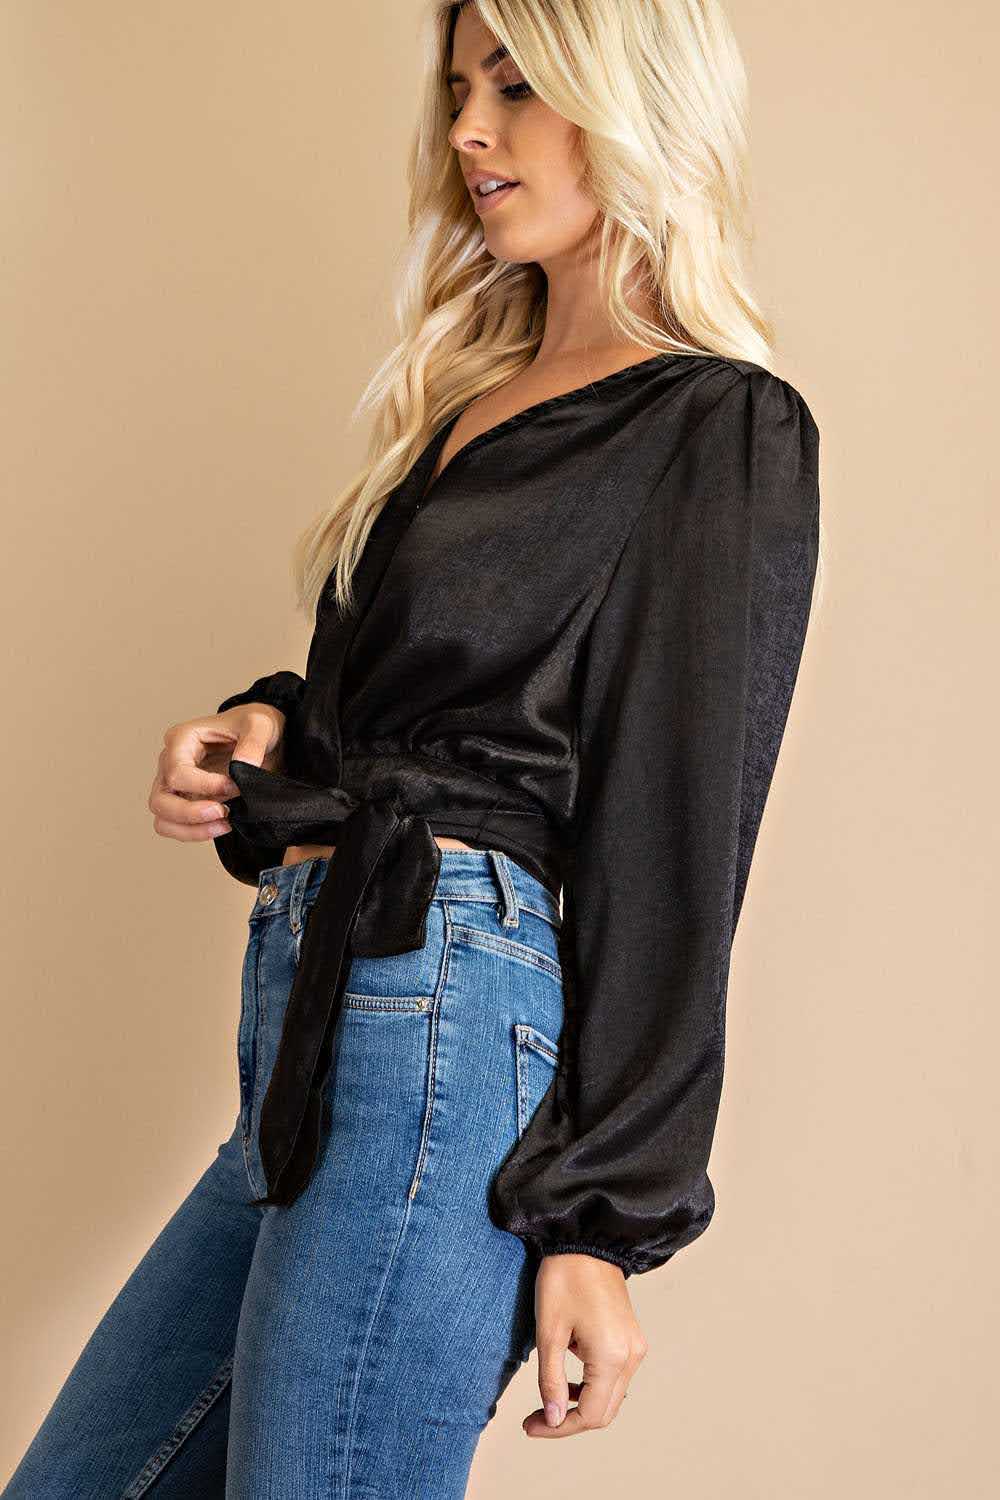 Effortlessly elevate your wardrobe with our Dina V-neck Front Tie Blouse in classic black. The snap button closure and 100% polyester fabric make it both stylish and comfortable, while the urban western, boho, cowgirl, and chic styles combine for a versatile and on-trend look. Embrace the boho-chic and bohemian vibes with this must-have piece. Model height: 5' 9".